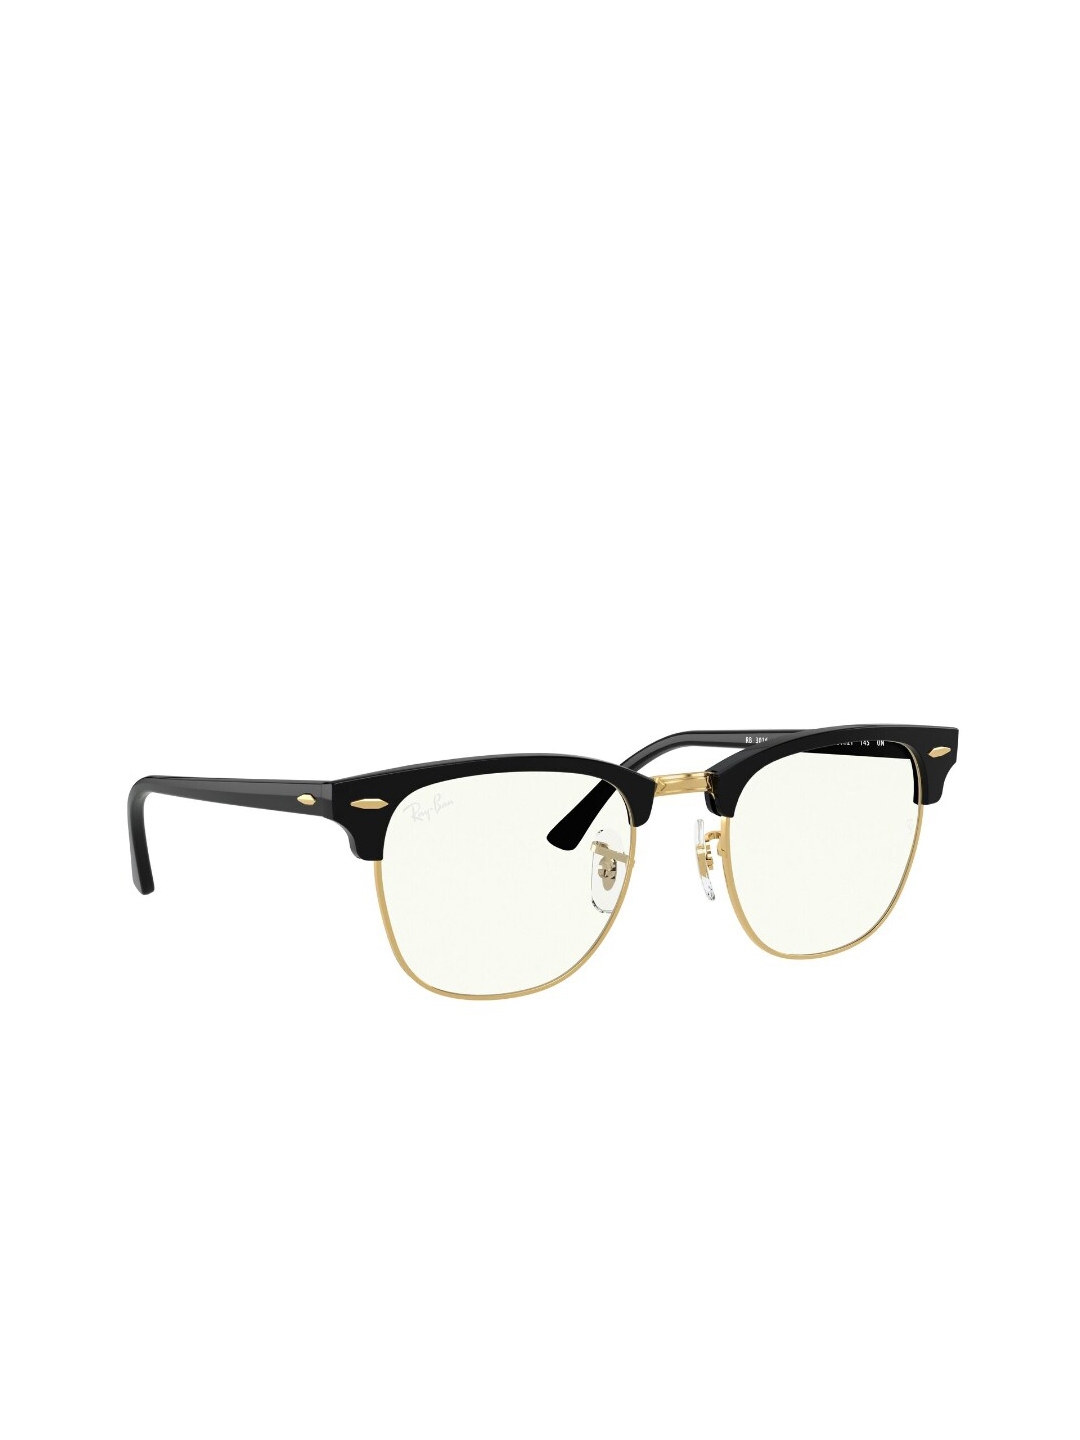 Buy Ray Ban Square Sunglasses With UV Protected Lens 8056597377485 ...